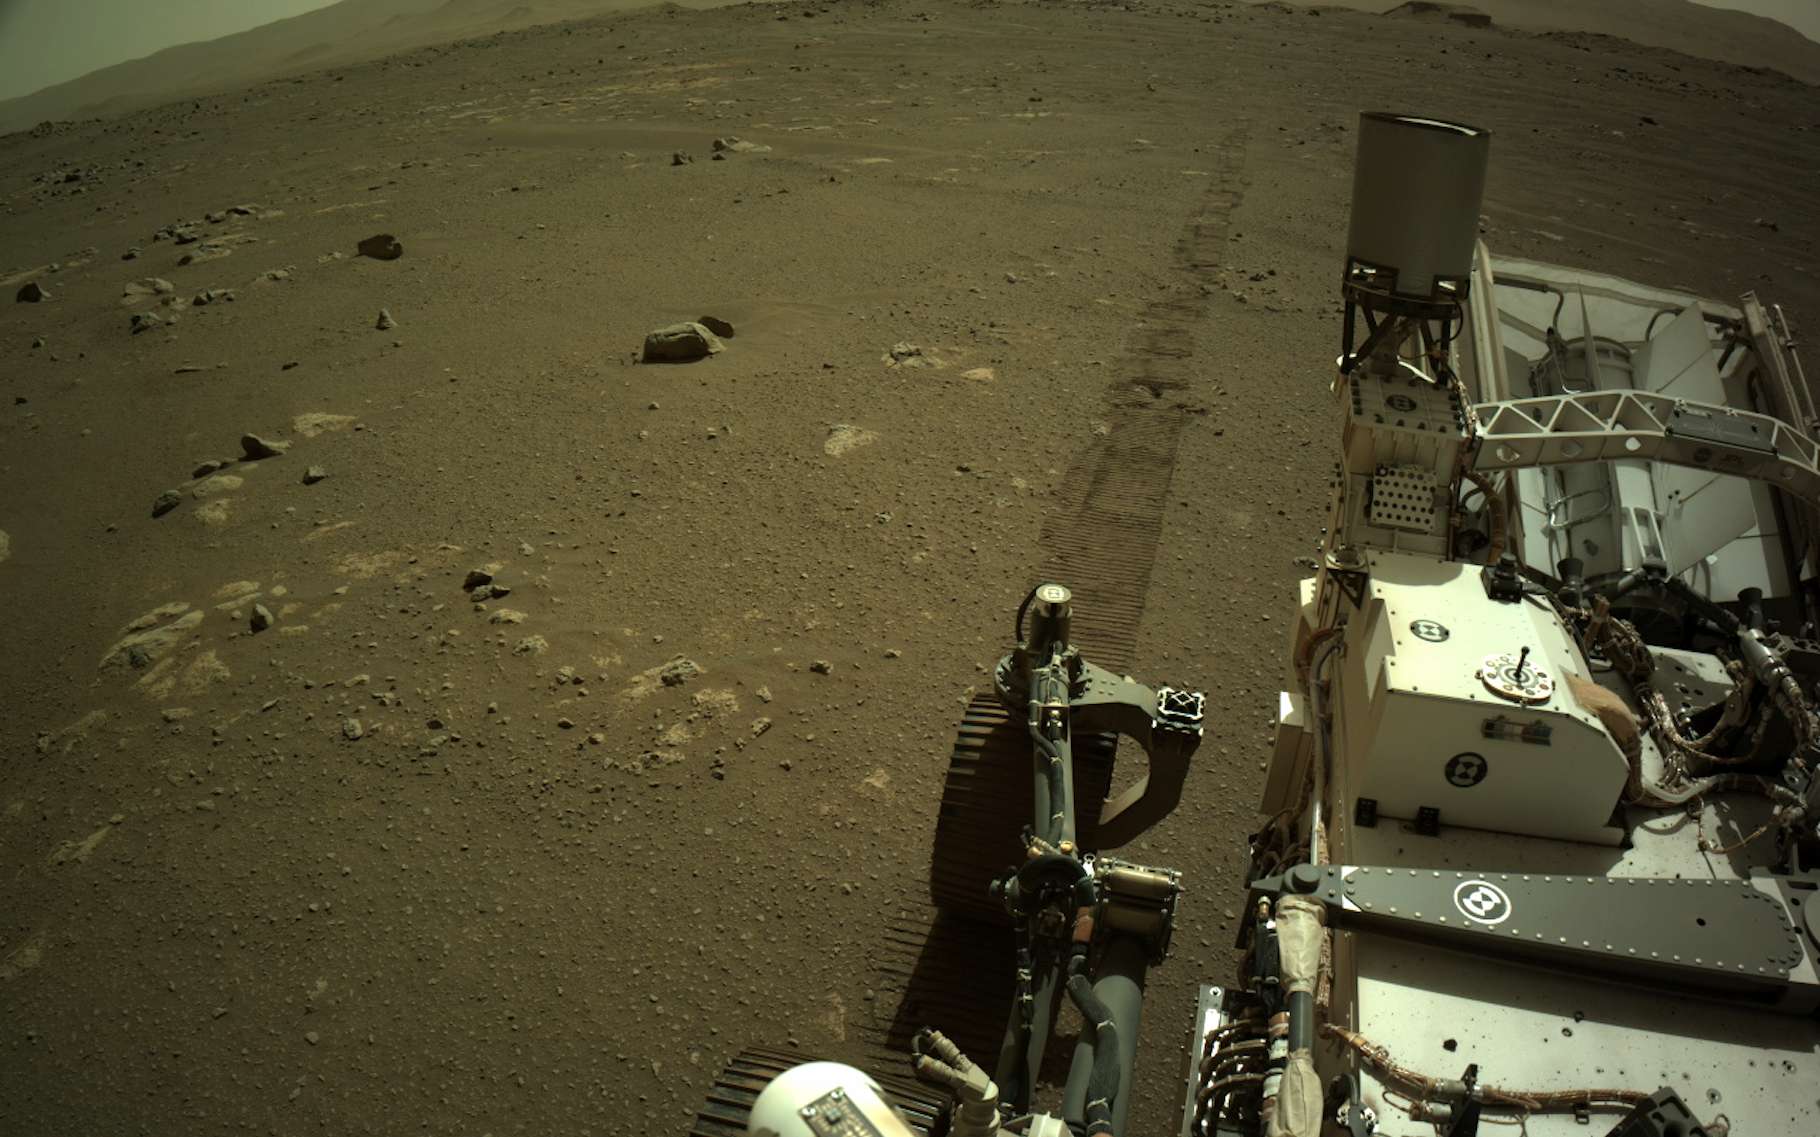 Perseverance on Mars: 16 minutes of recorded sound of a moving rover

